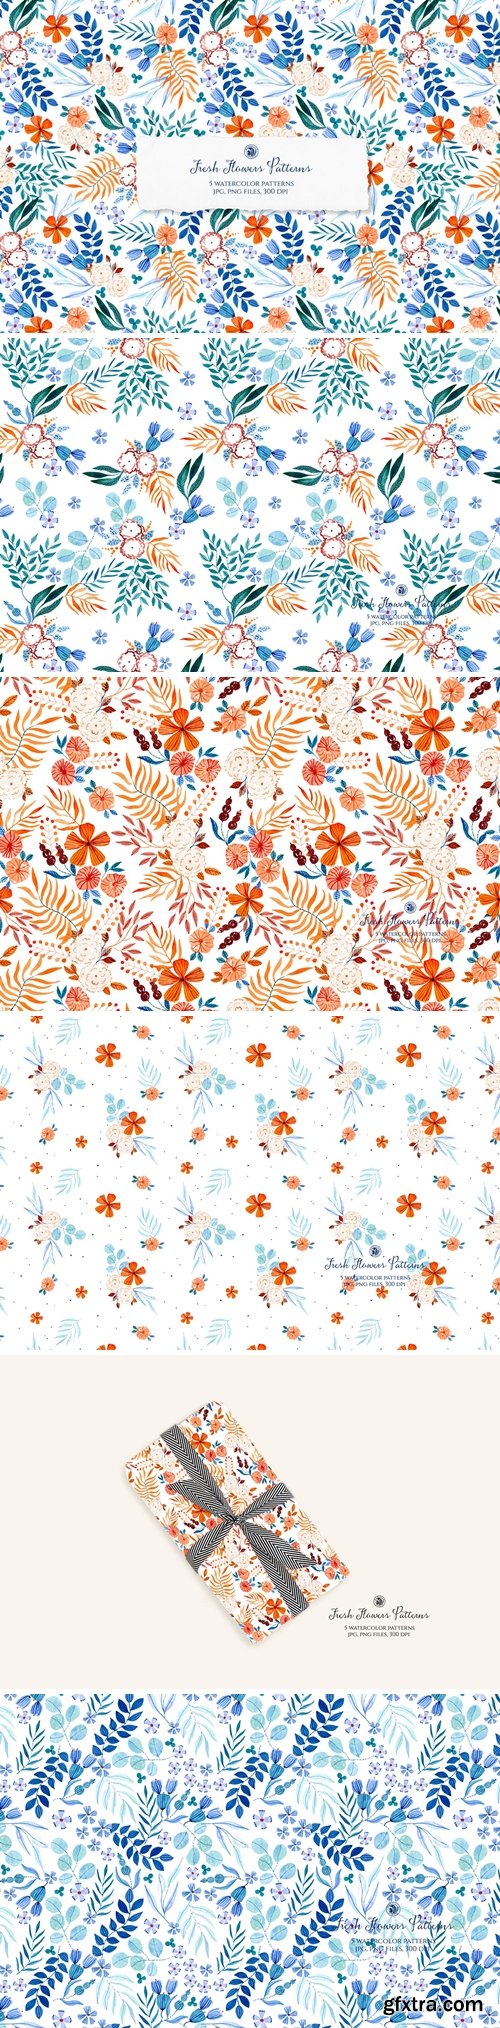 Fresh Flowers Watercolor Patterns Collection